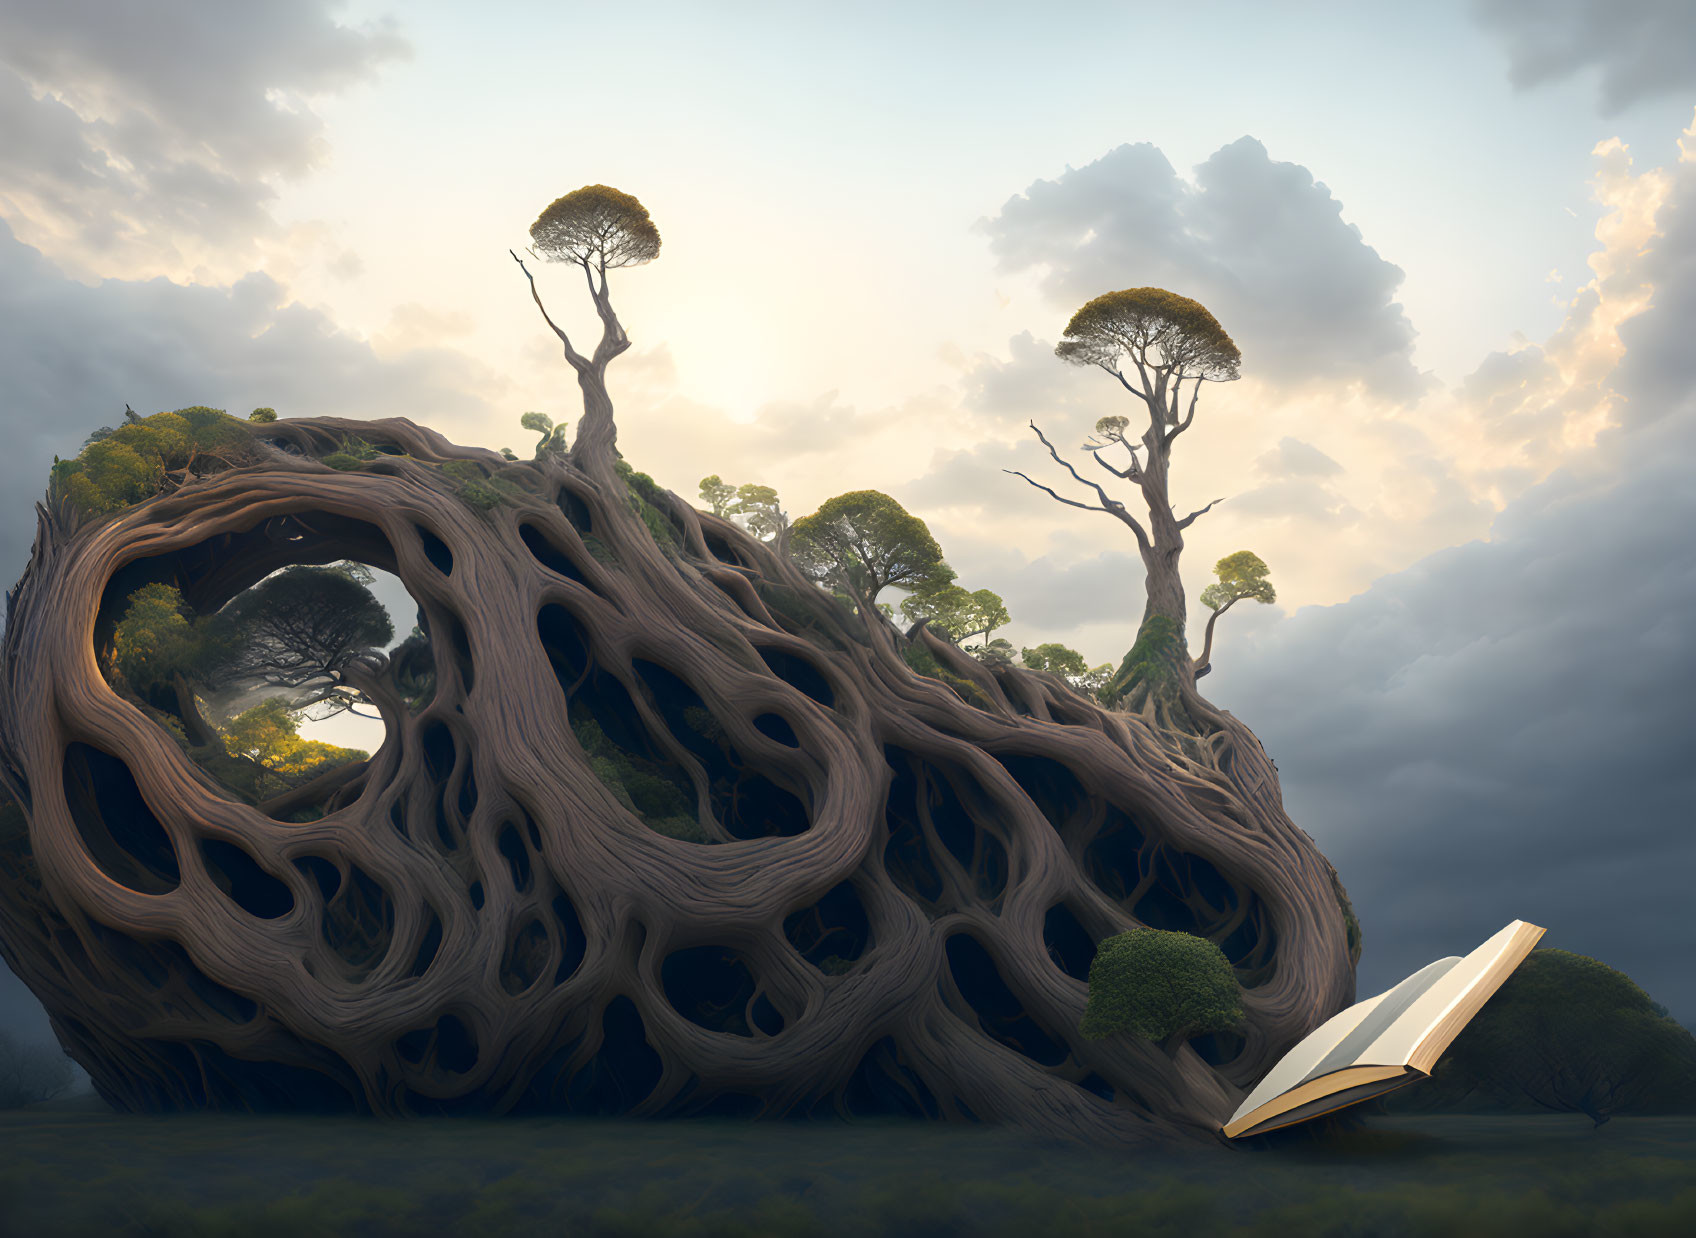 Intricate twisted tree with hollows supporting smaller trees under dramatic sky and open book foreground.